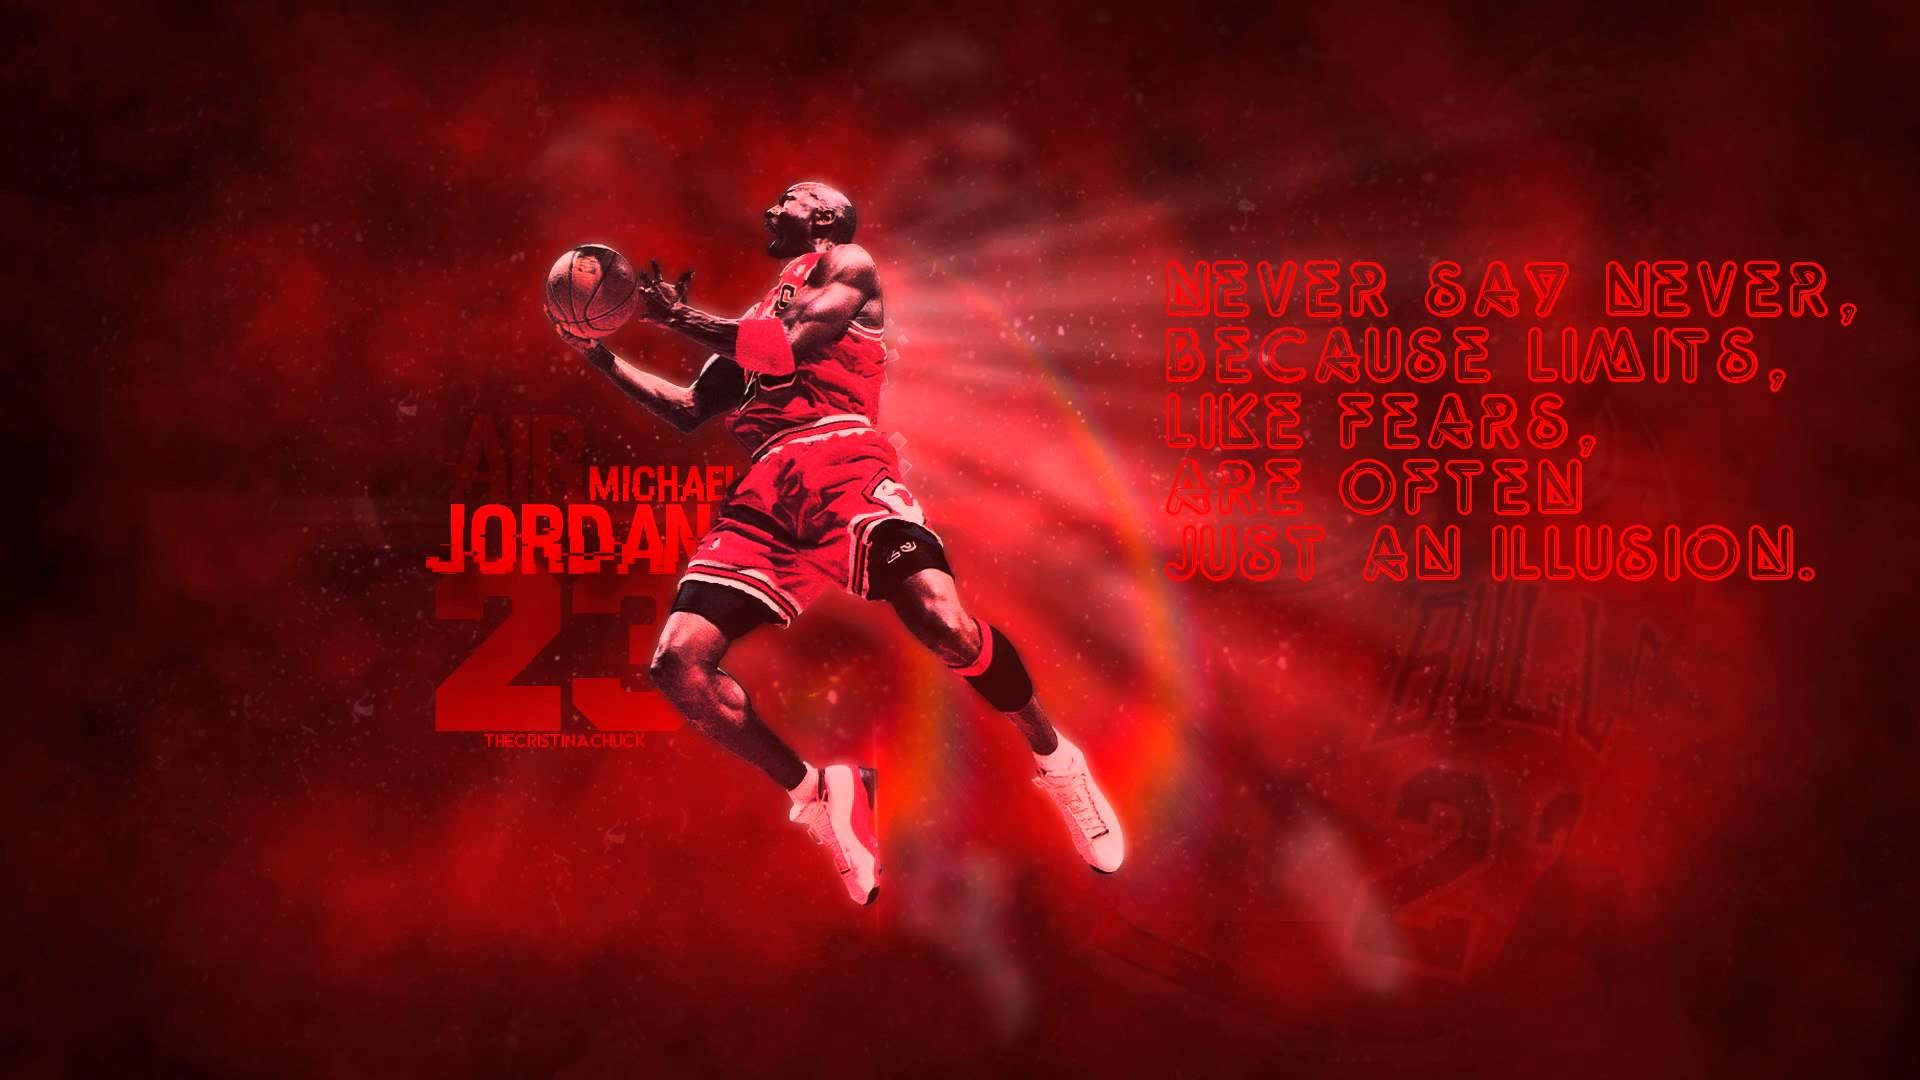 1920x1080 Never say never, because limits, like fears, are often just an illusion. Michael  Jordan